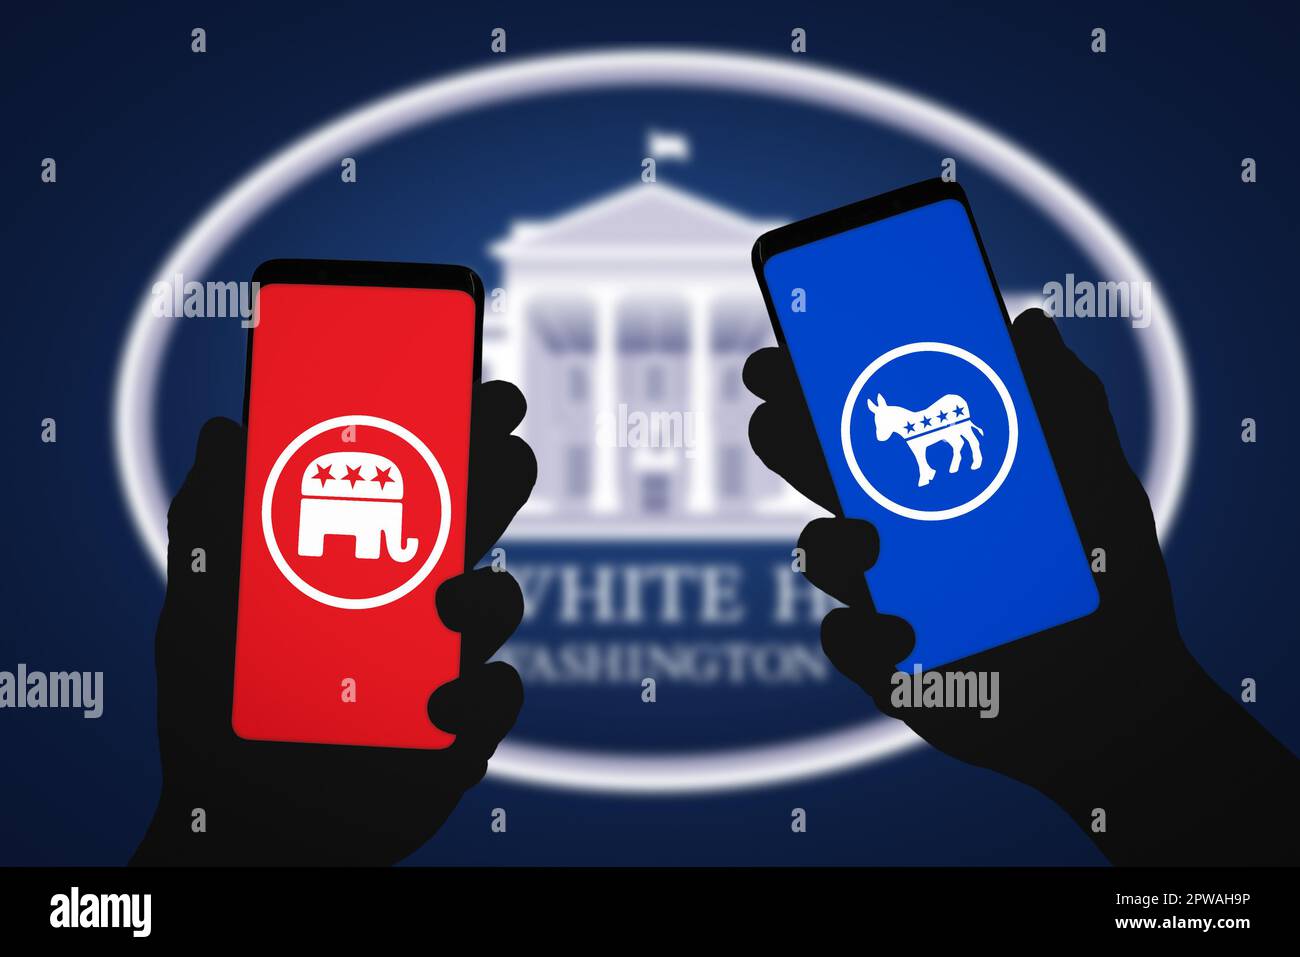 Republican and Democratic Party in the United States of America Stock Photo